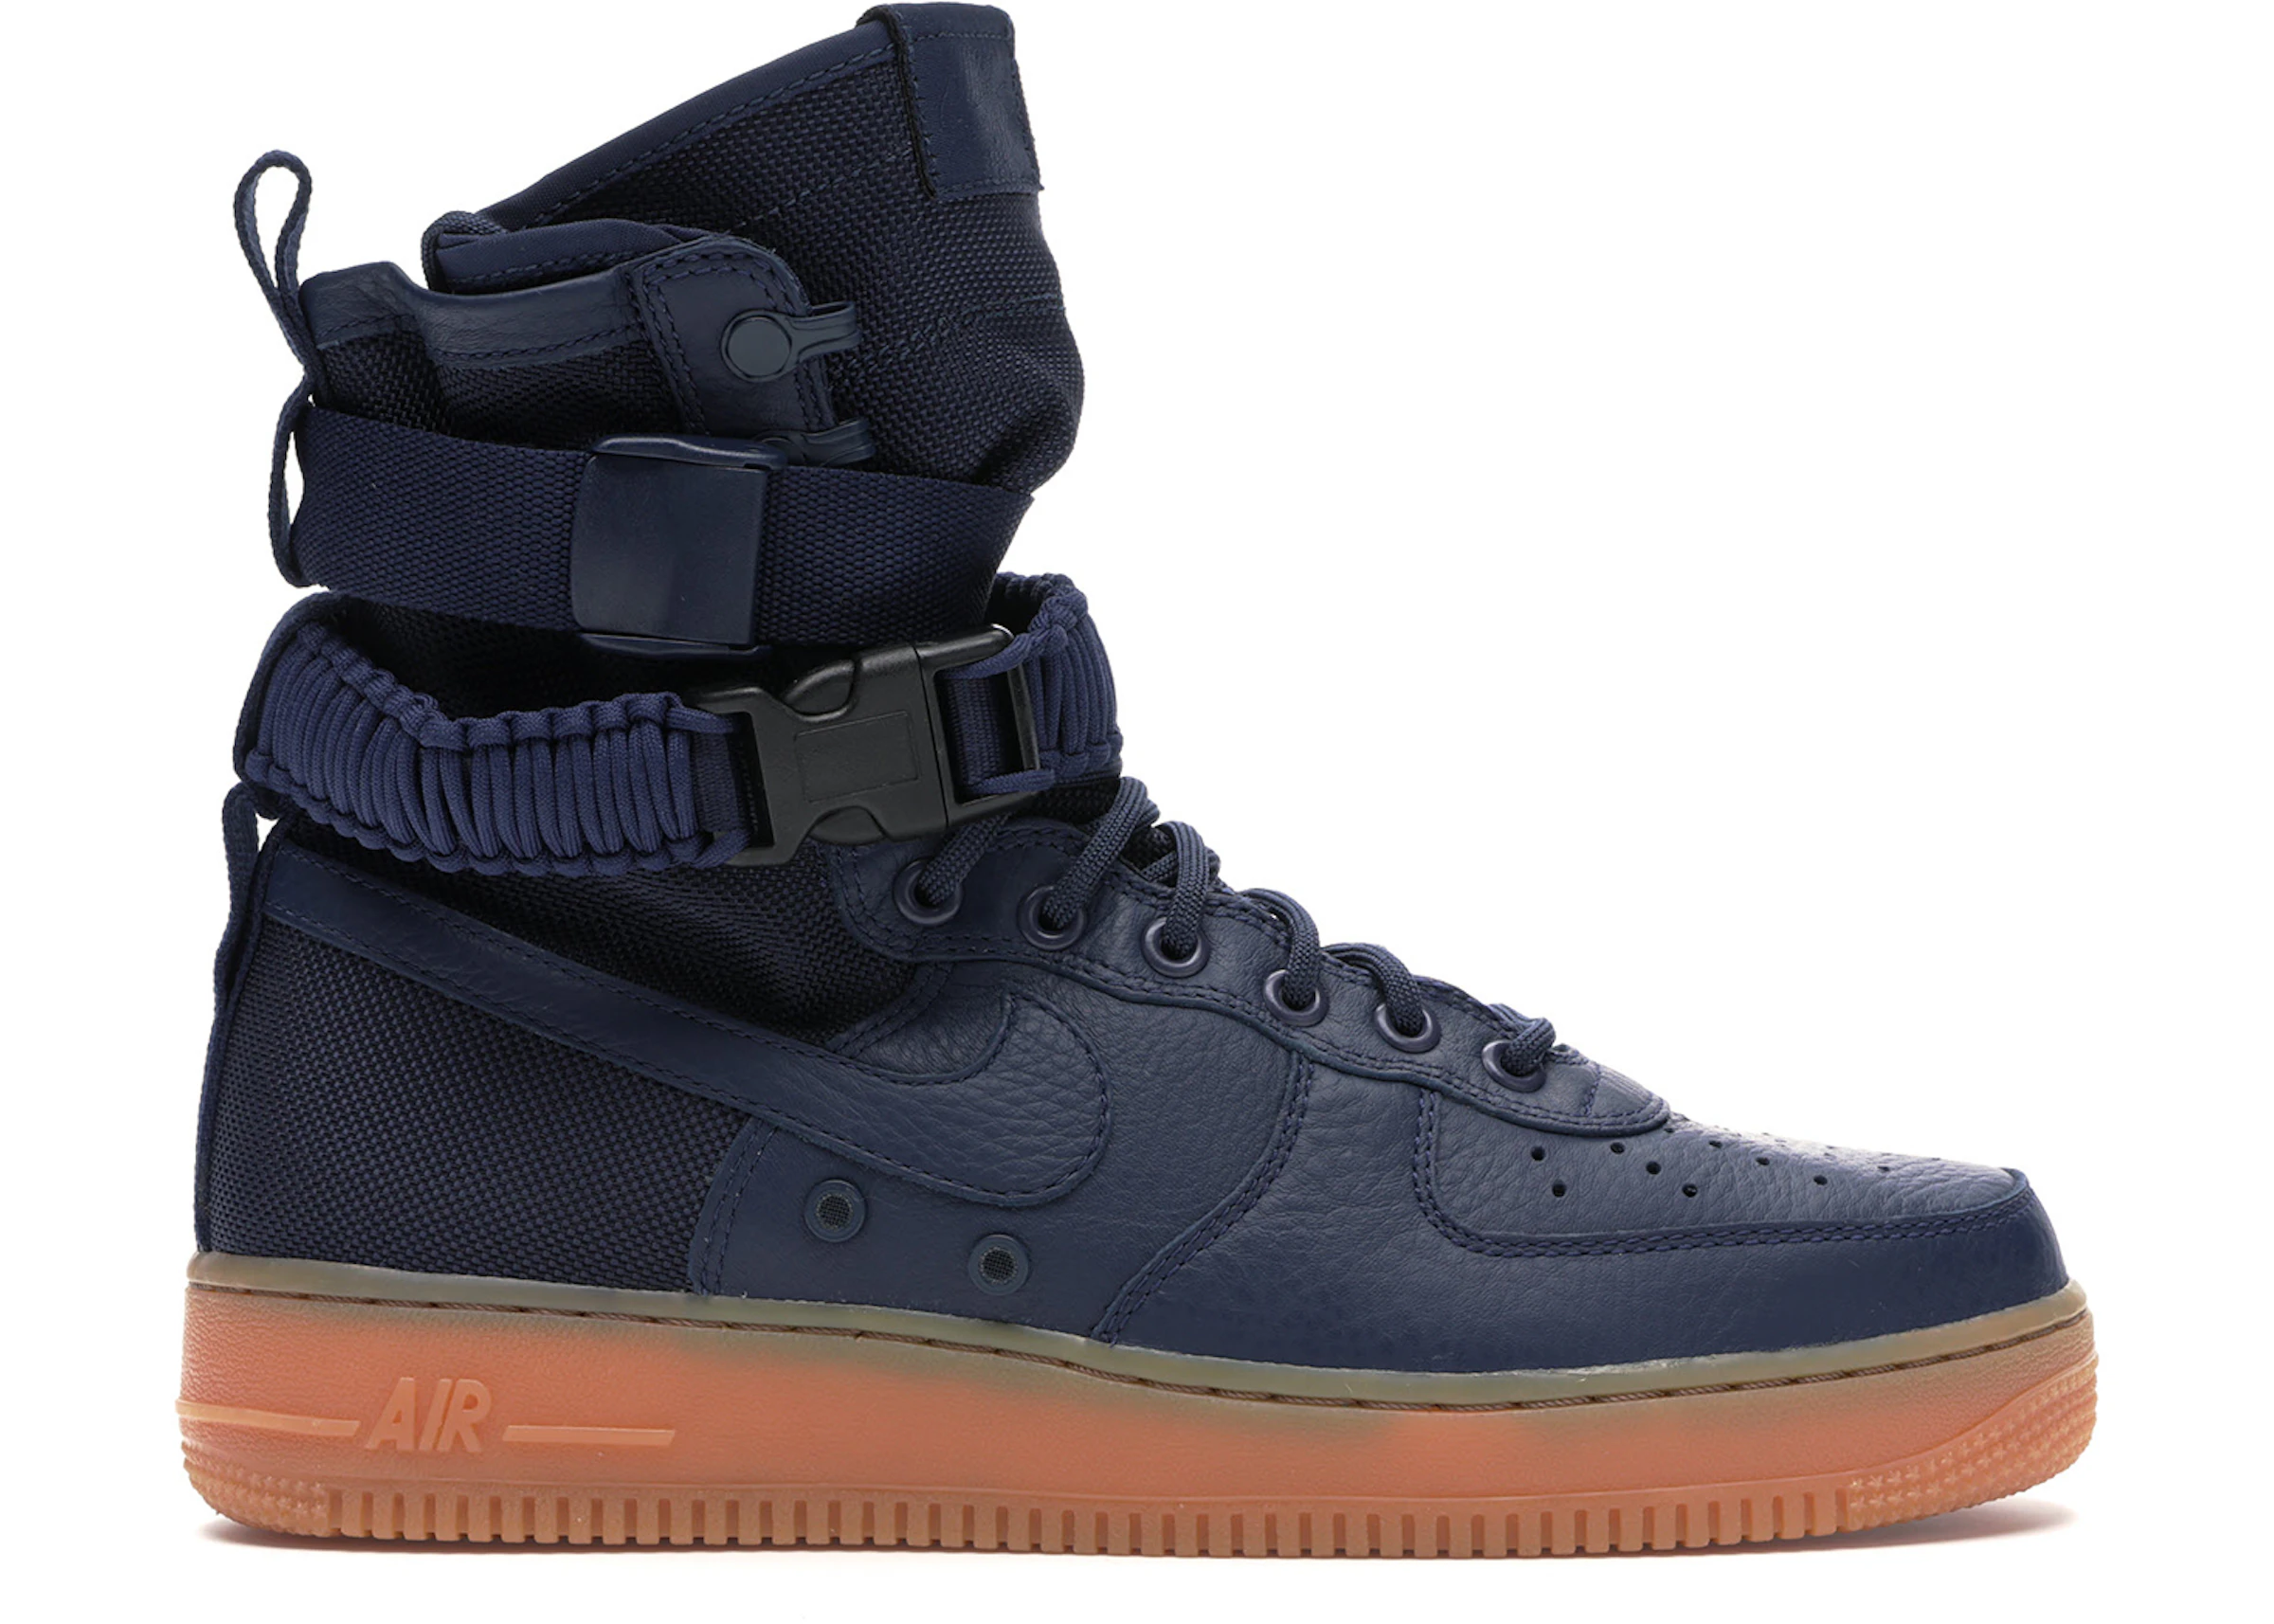 Distribute Getting worse Also Nike SF Air Force 1 High Navy Gum - 864024-400 - US